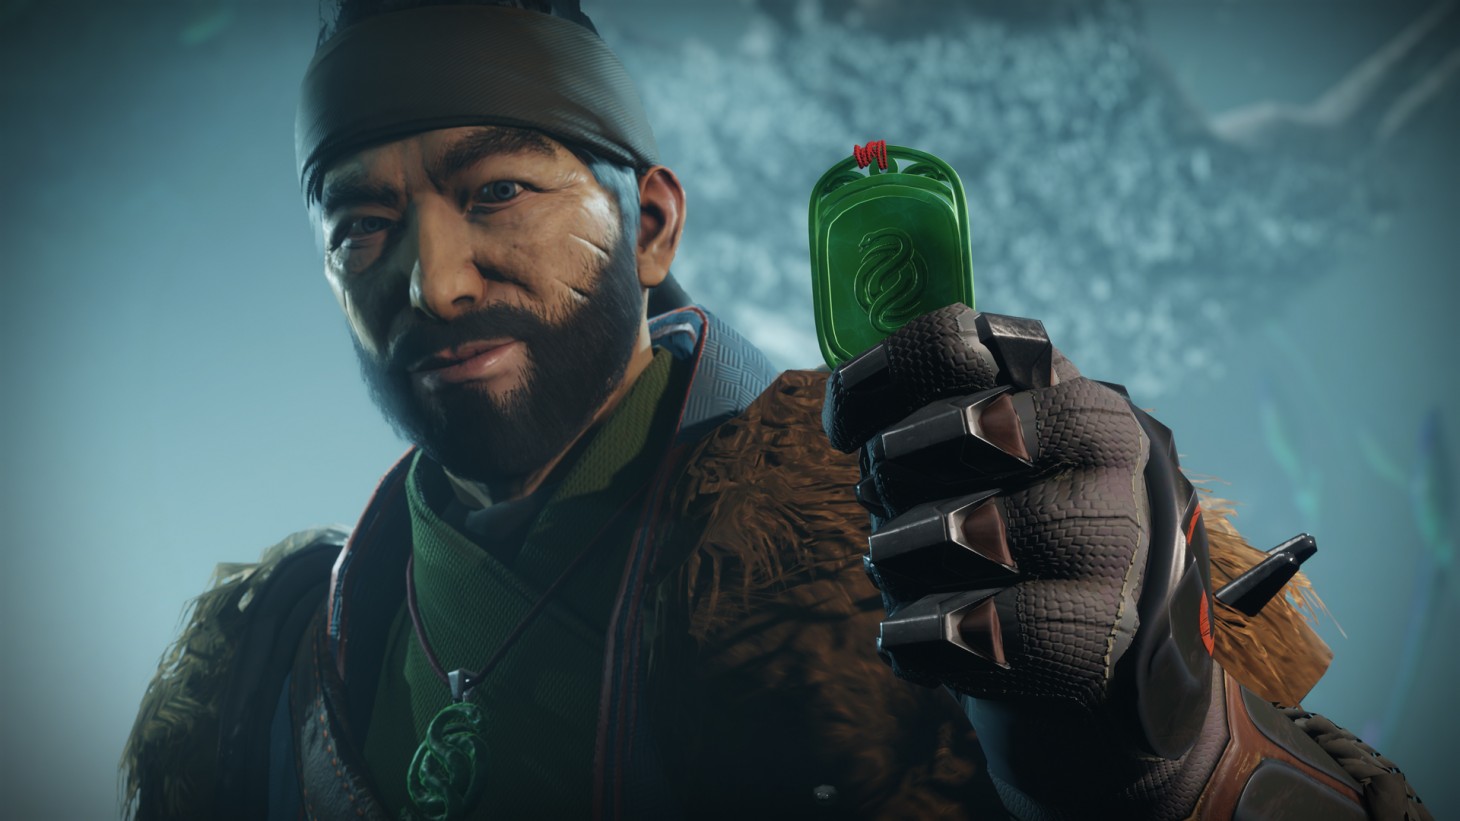 Destiny 2: Forsaken’s New Gambit Mode And System Changes Bring Back The